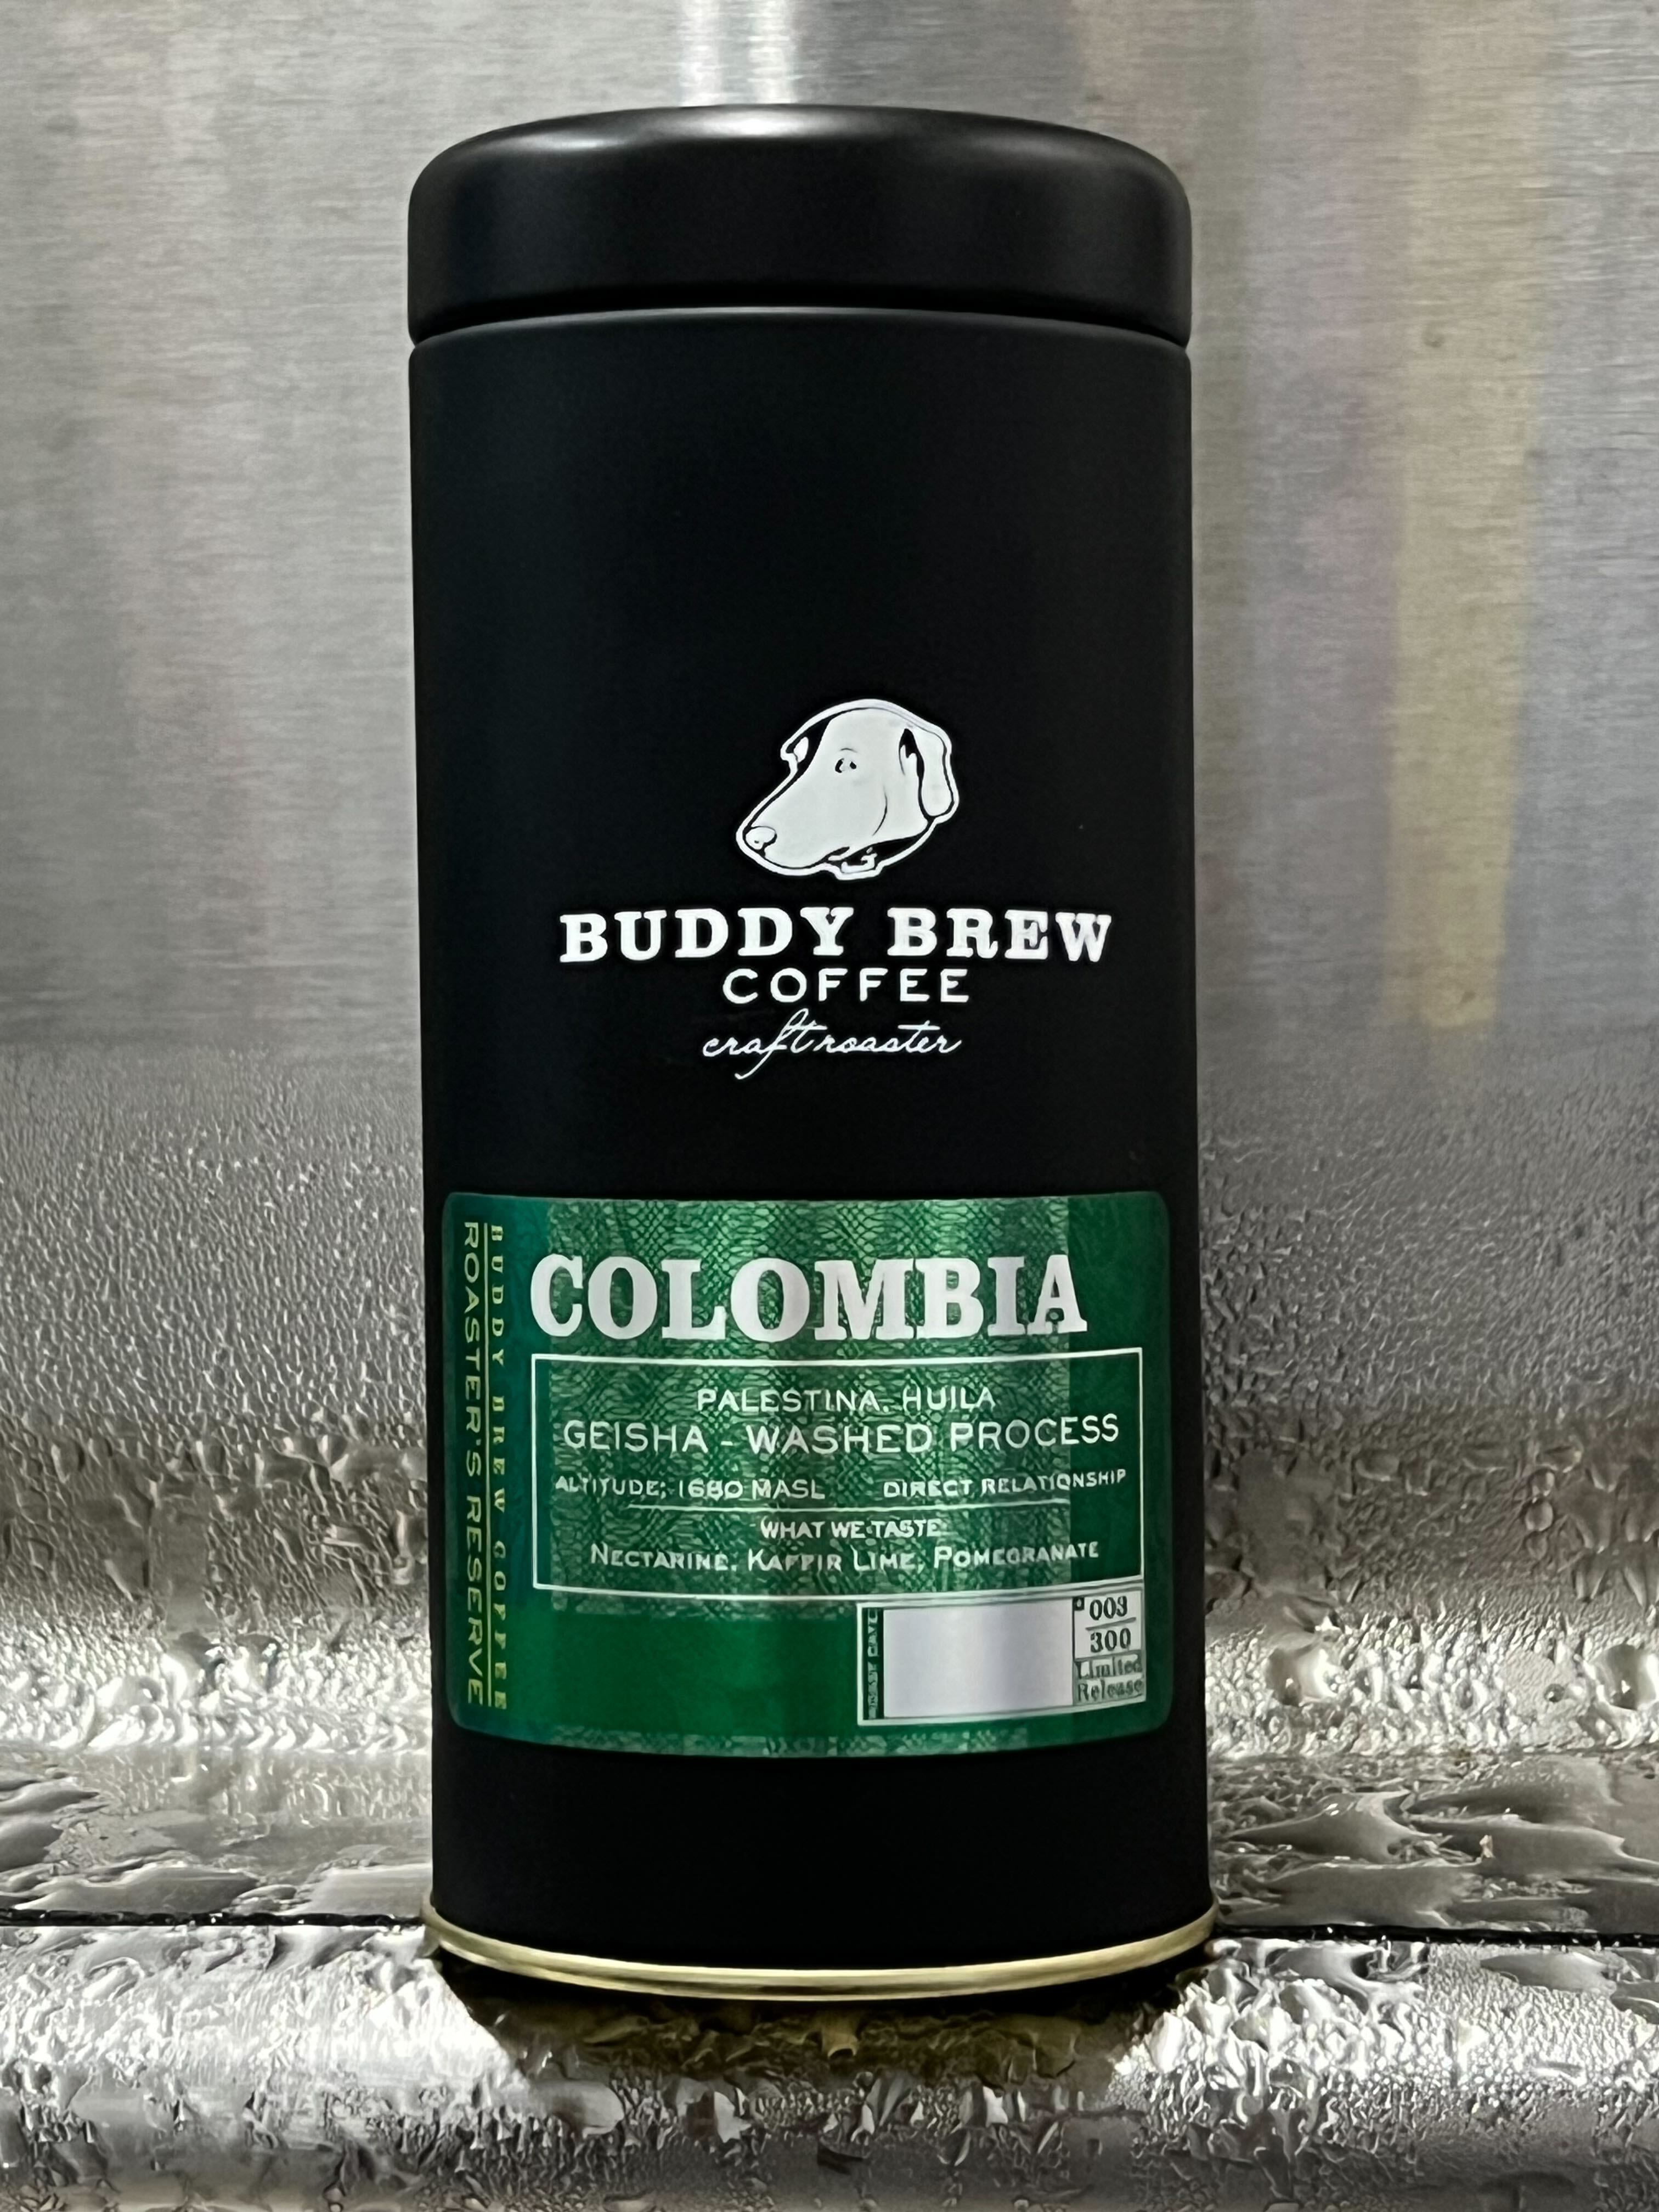 Colombian Cold Brew - Canned Coffee - La Colombe Coffee Roasters